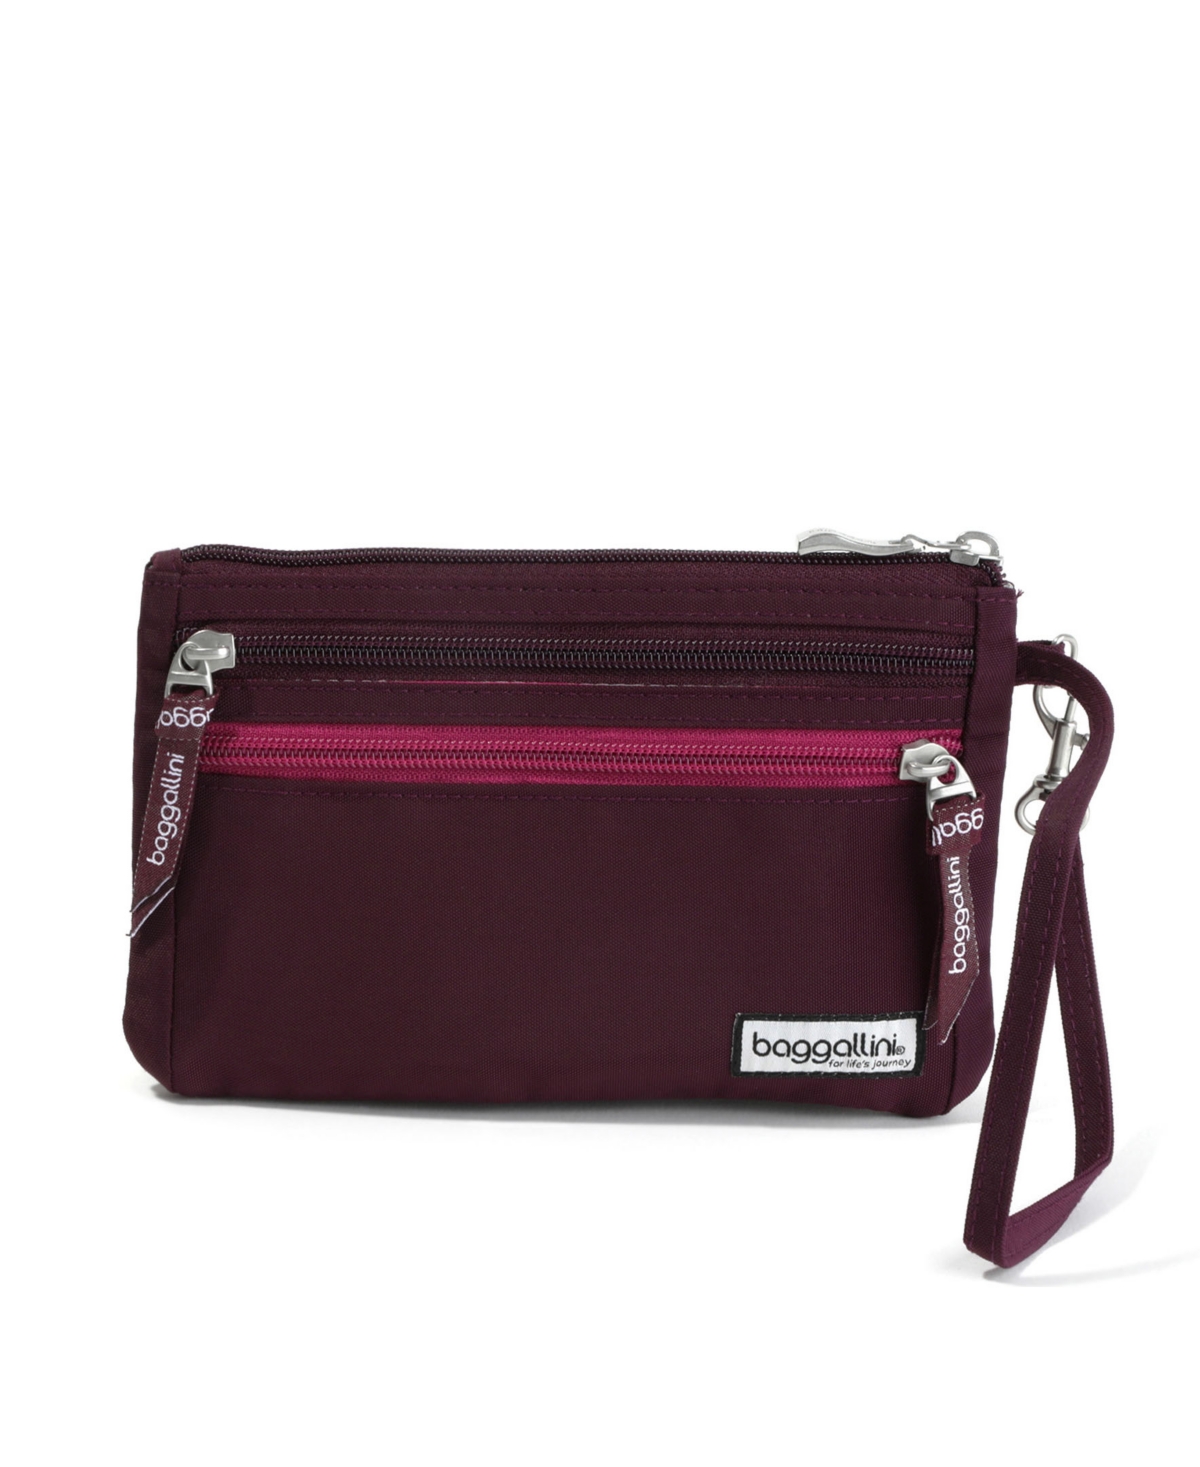 Baggallini Women's Rfid Currency Organizer In Mulberry